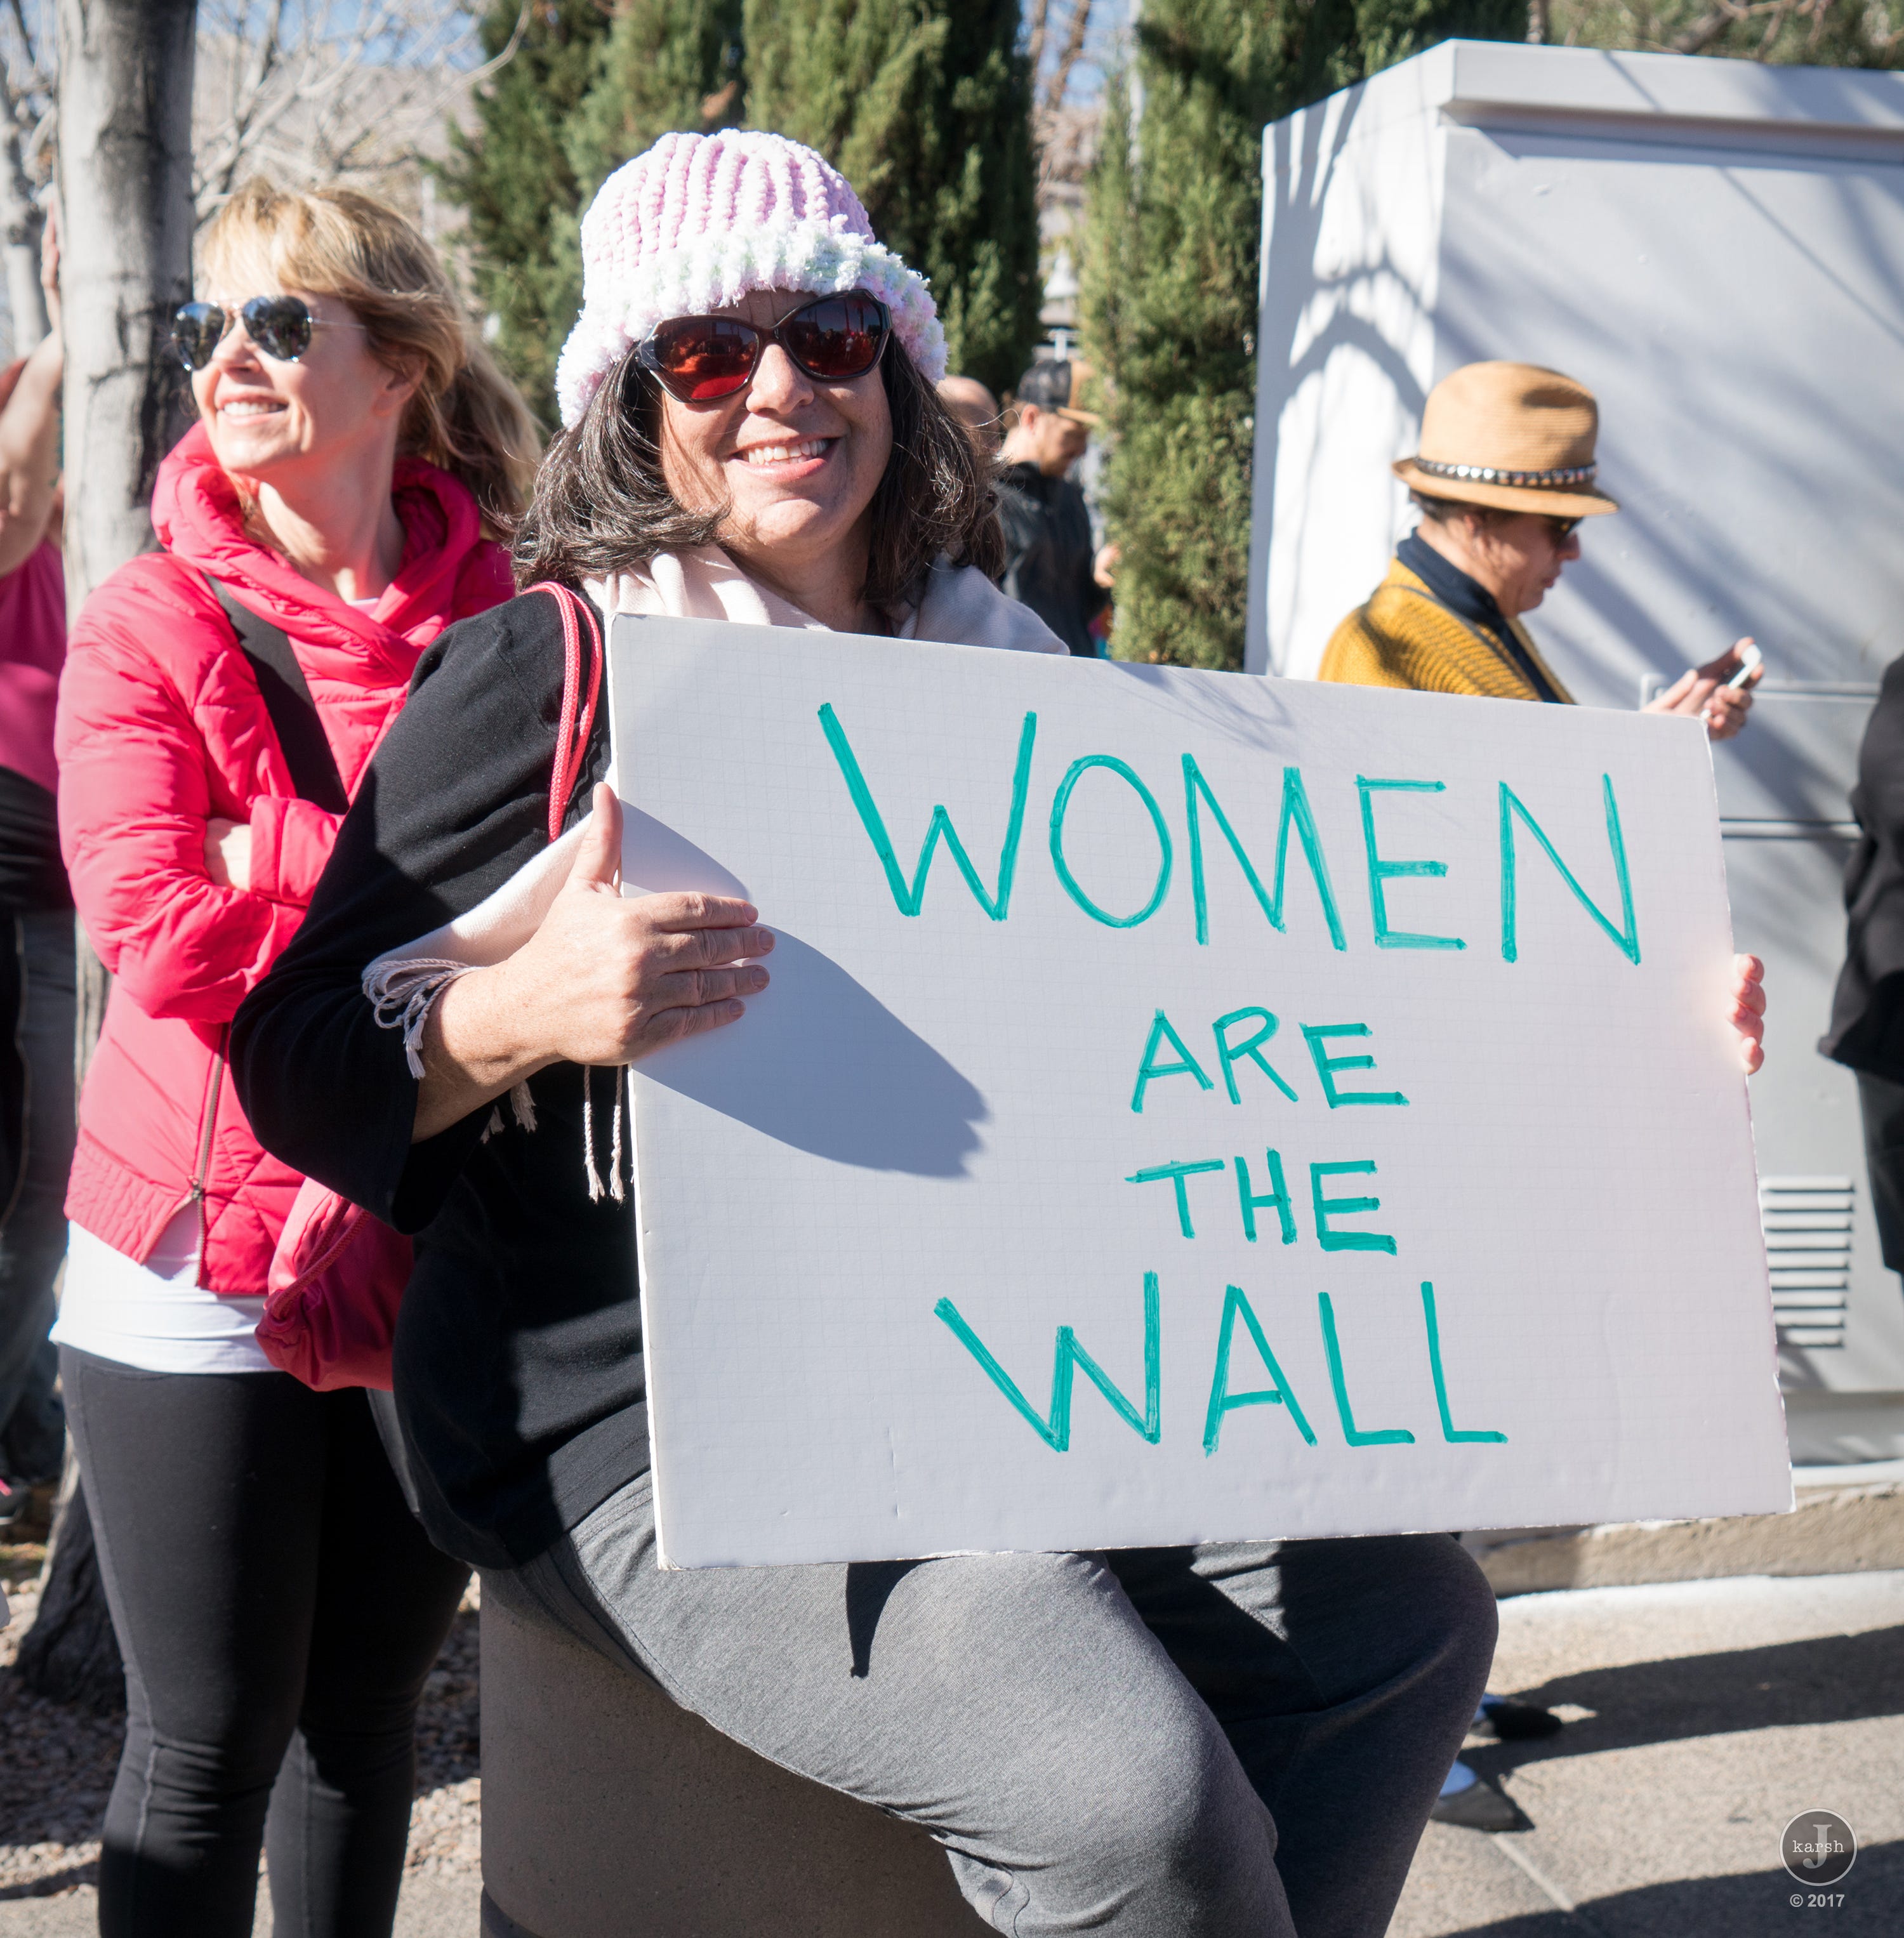 In Pictures The Las Vegas Womens March By Jason Karsh Vantage Medium 